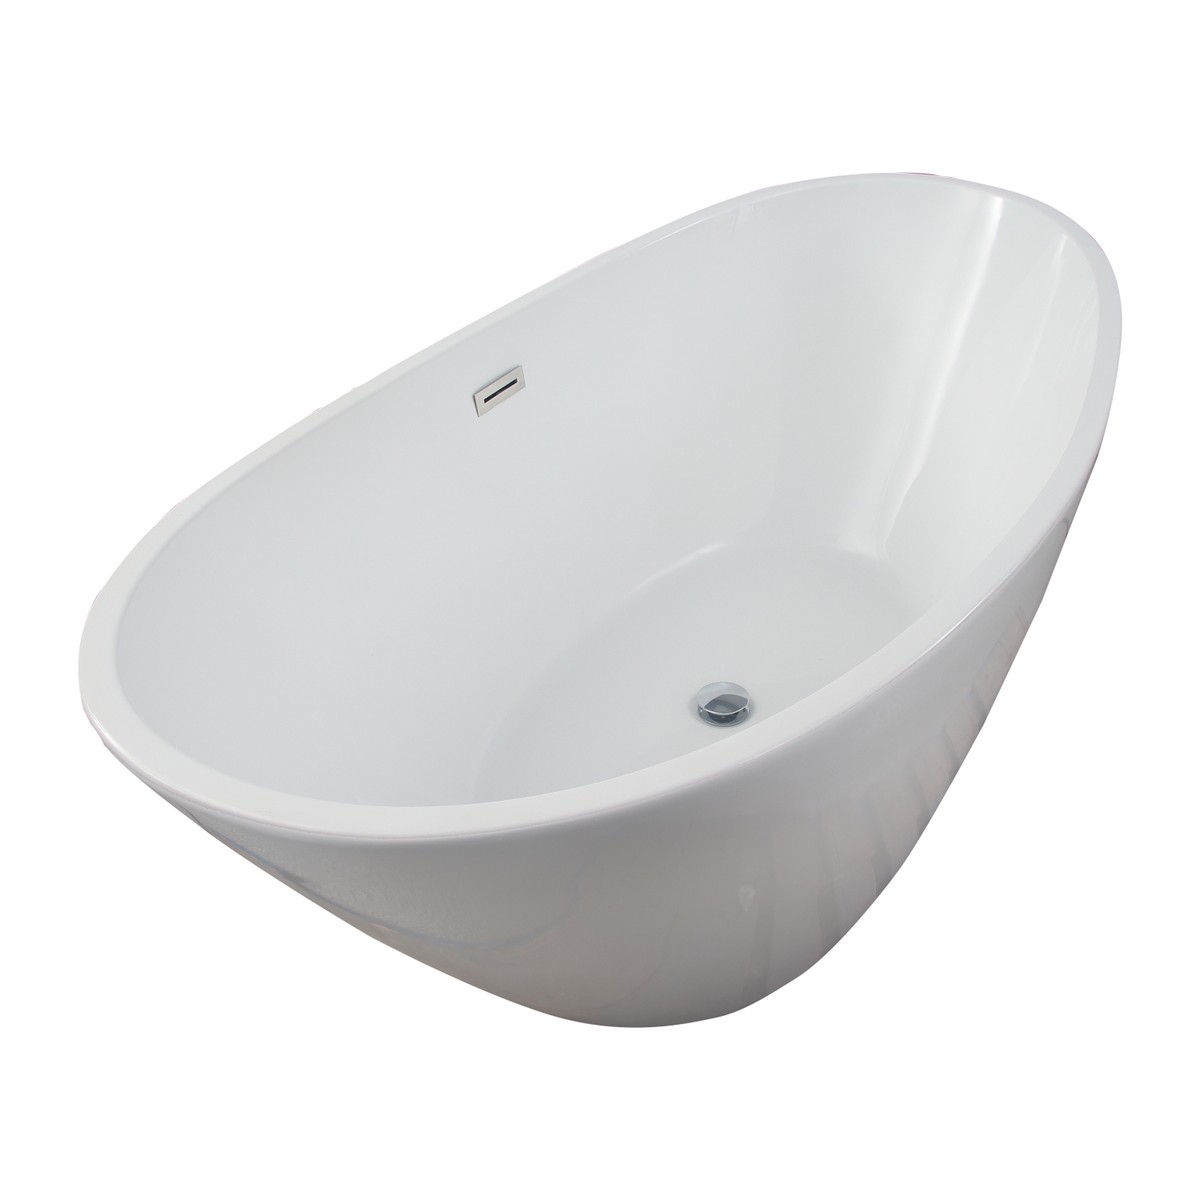 BARCLAY ATDSN62FIG NEWMAN 62 INCH ACRYLIC FREESTANDING OVAL SOAKING DOUBLE SLIPPER BATHTUB IN WHITE WITH INTEGRAL DRAIN AND OVERFLOW